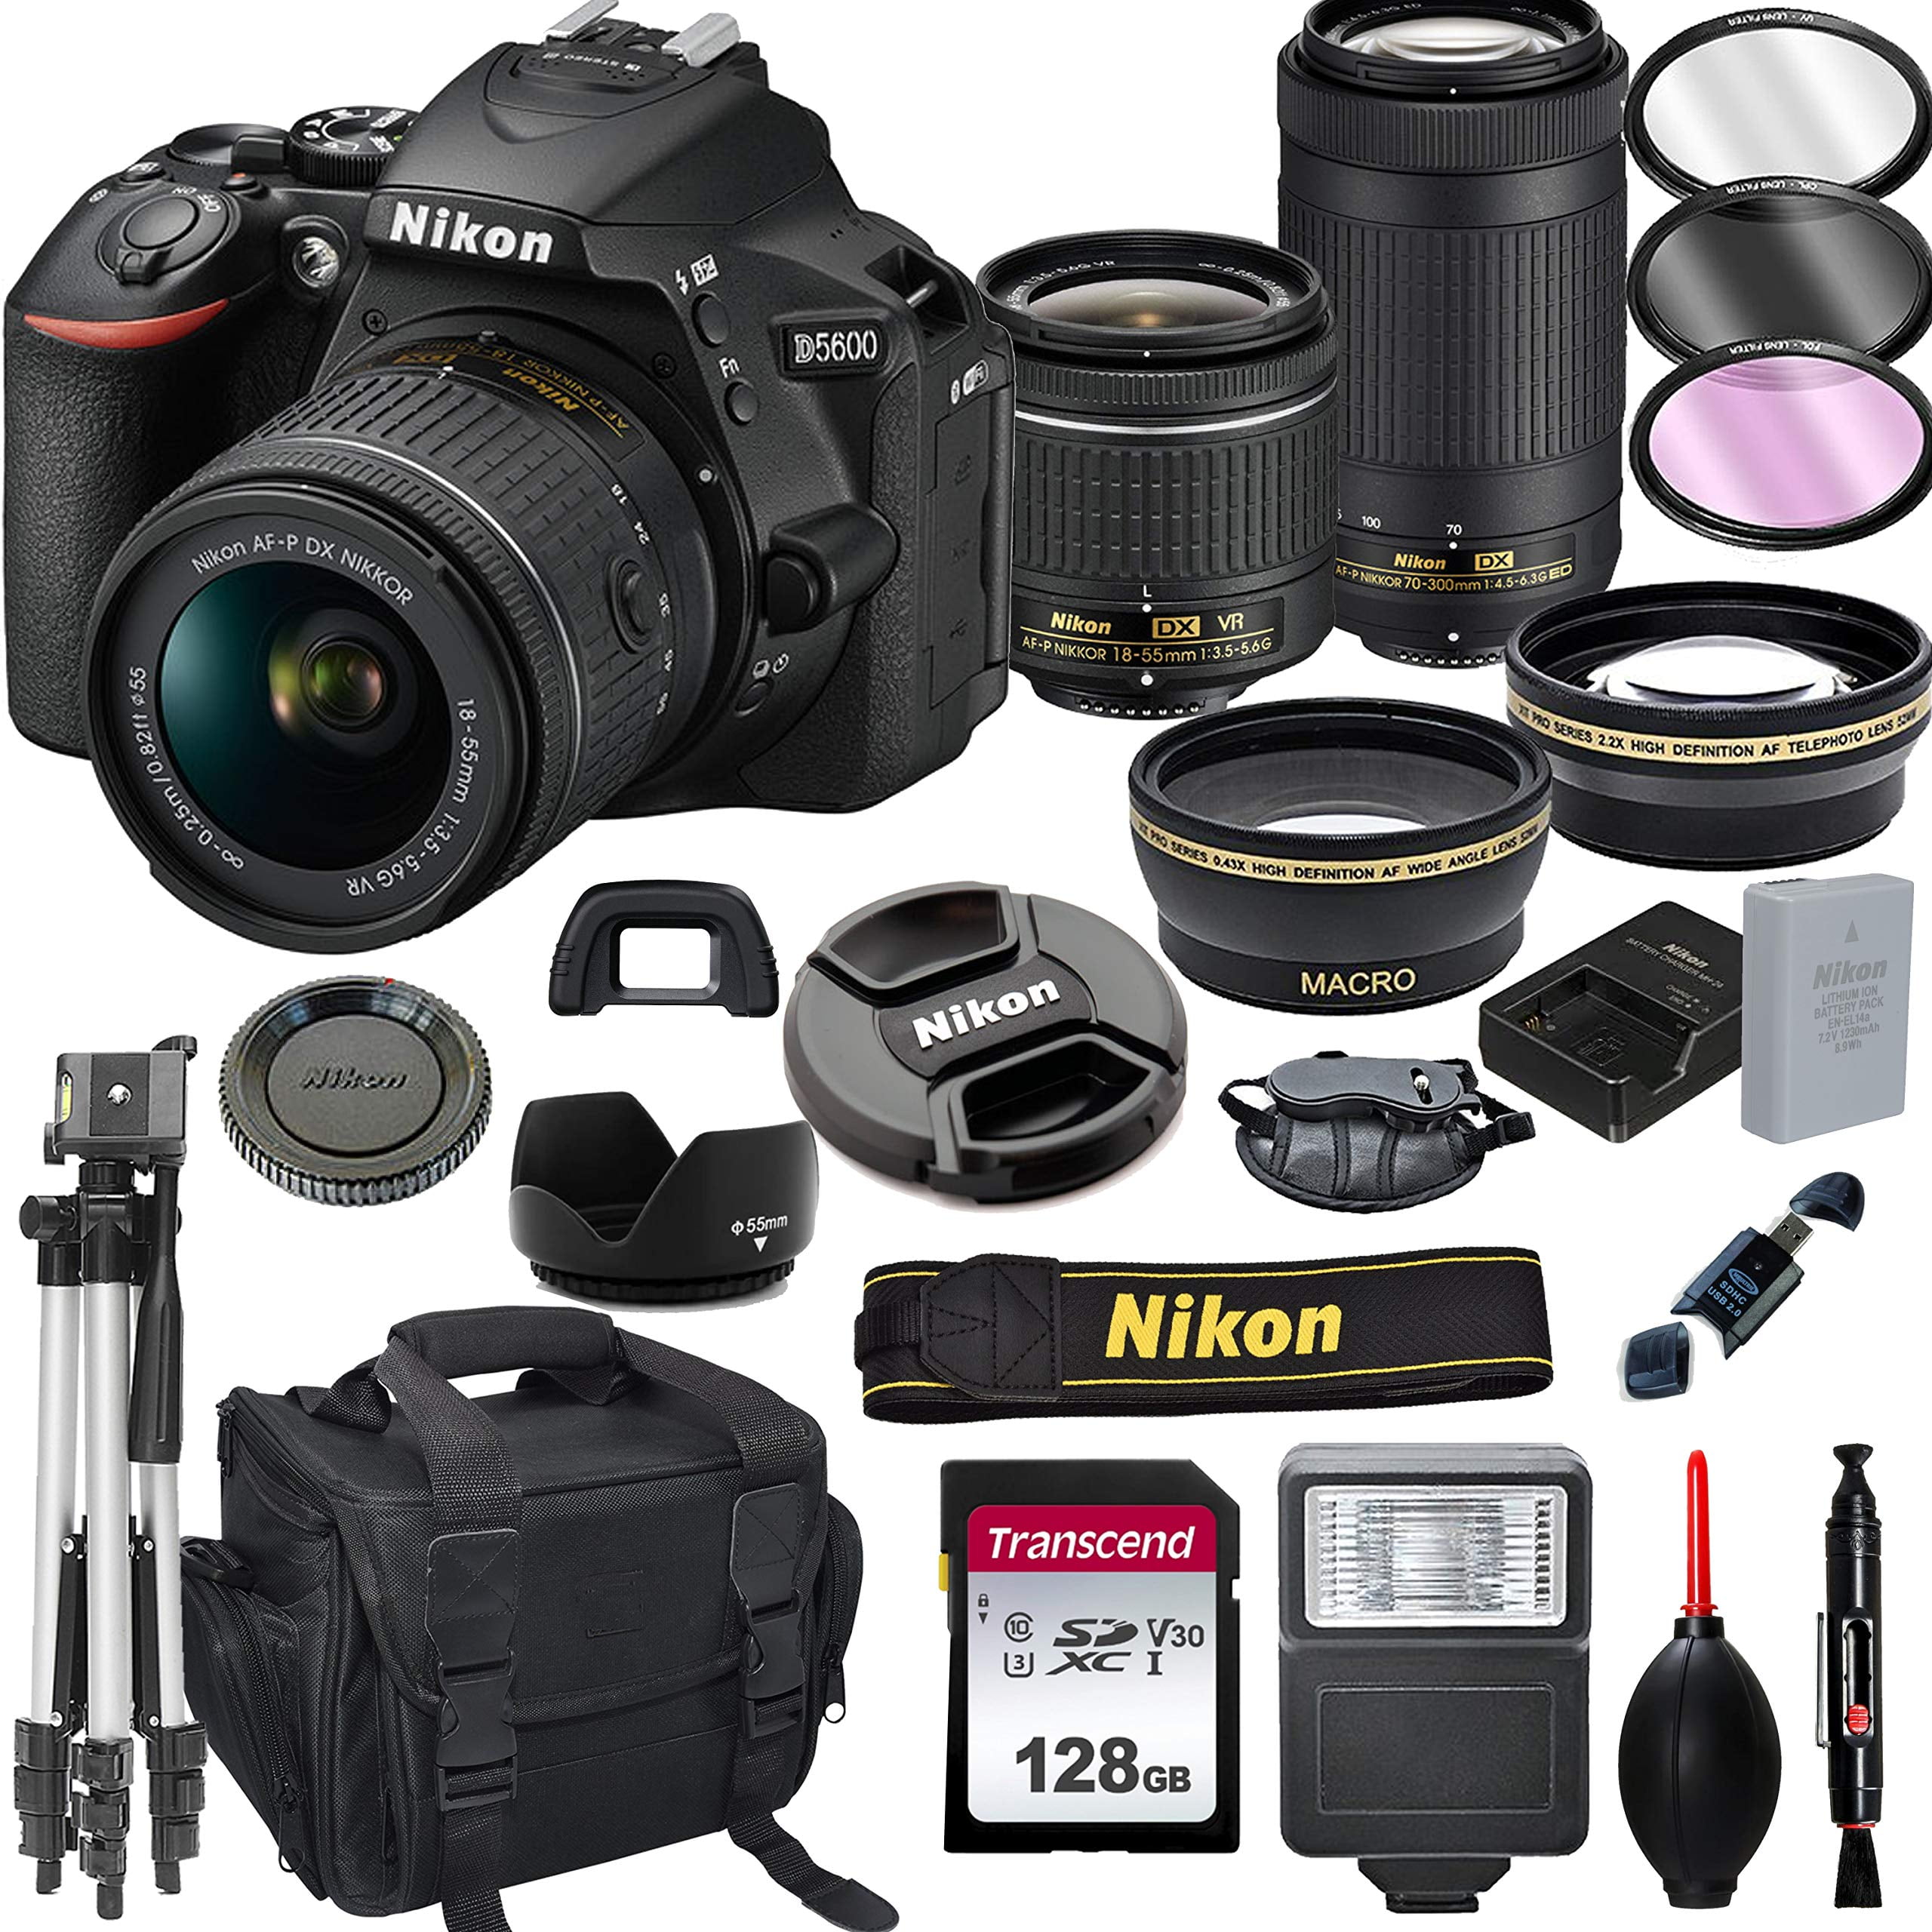 Nikon D3500 DSLR Camera with 18-55mm VR and 70-300mm Lens Bundle with  420-800mm Preset f/8 Telephoto Lens + 128GB Card, Tripod, Flash, and More  23pc 